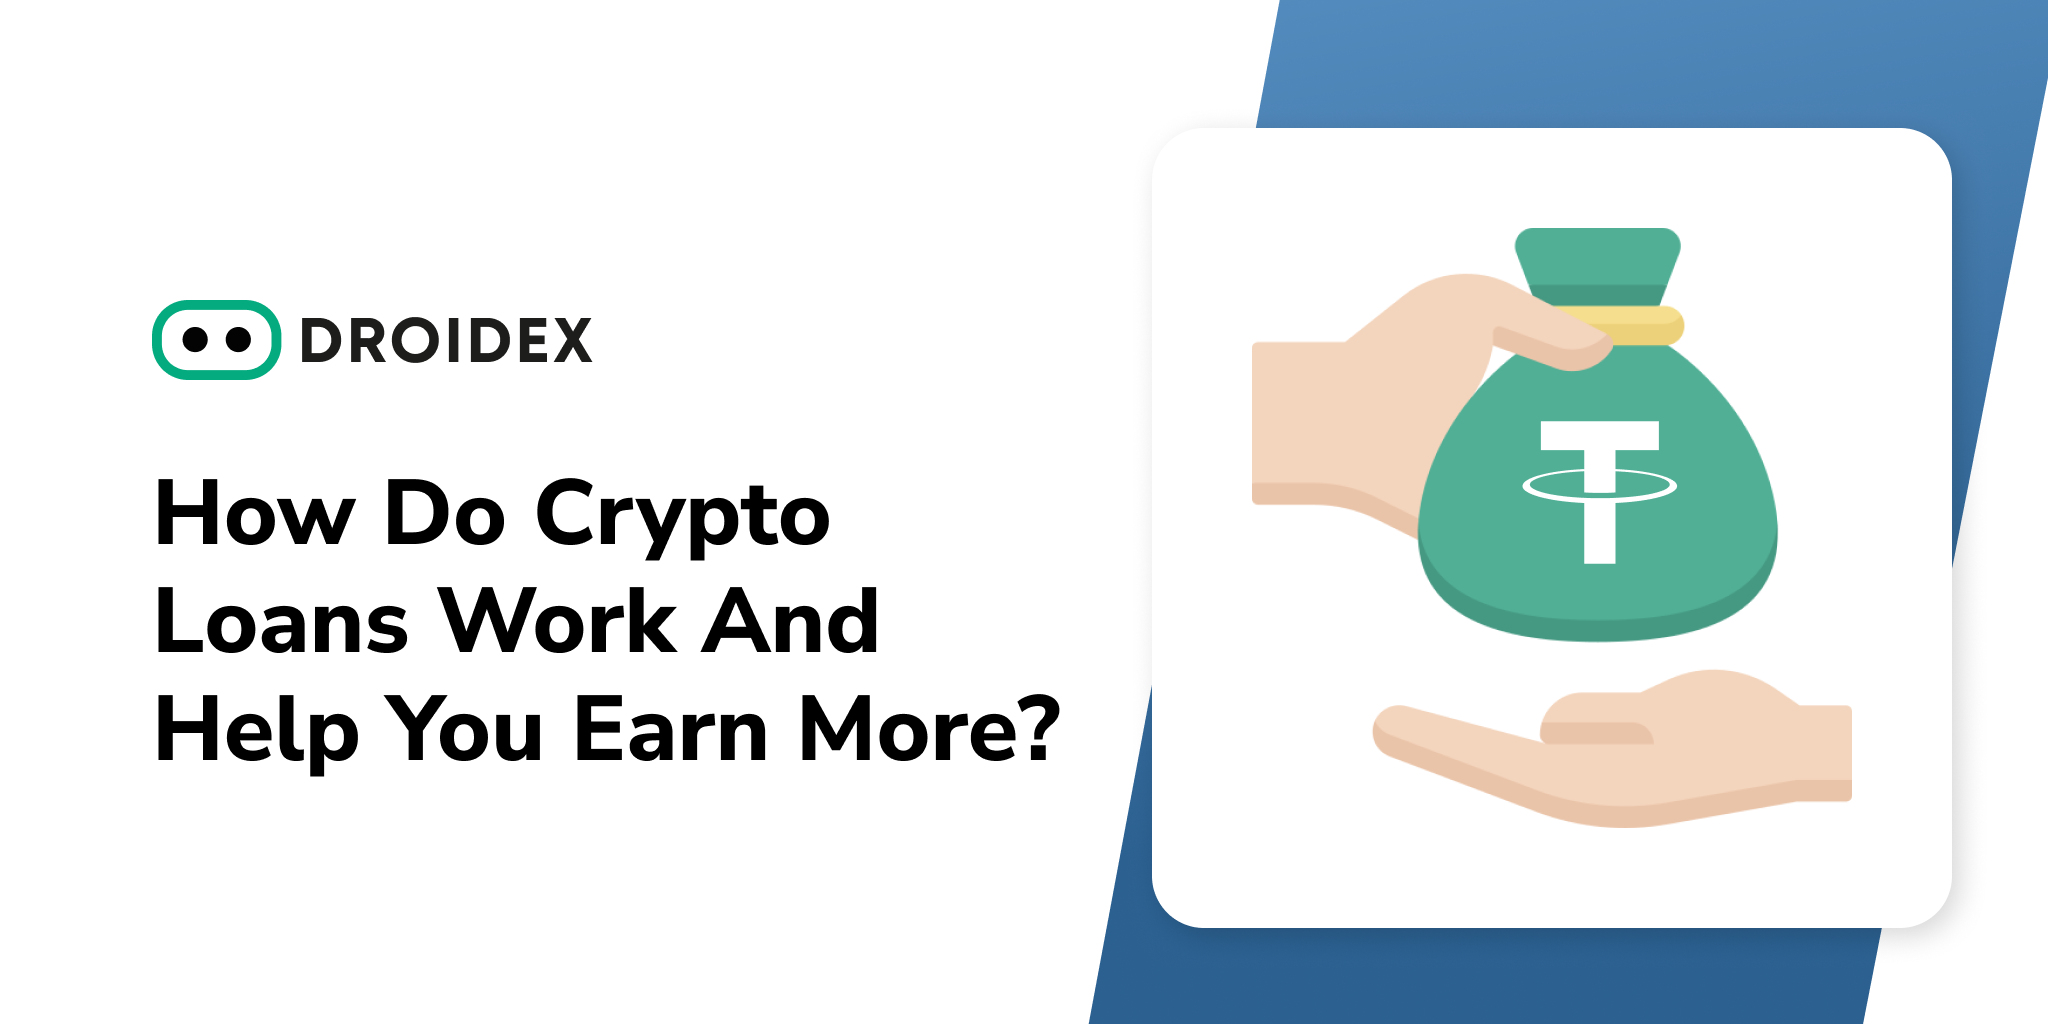 How Do Crypto Loans Work and Help You Earn More